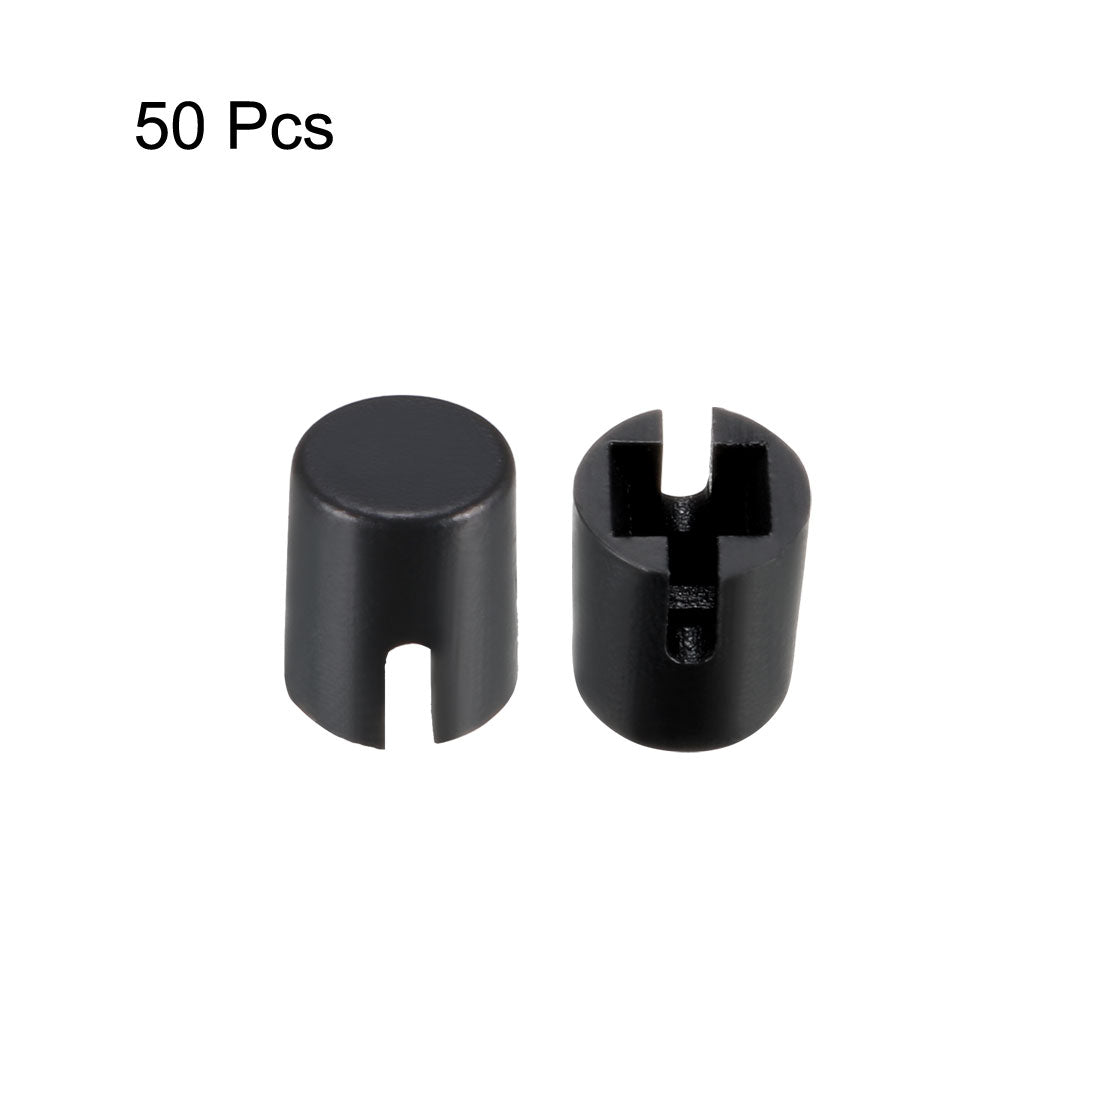 uxcell Uxcell 50Pcs Plastic 4.6x5.5mm Push Button Tactile Switch Caps Cover Keycaps Black for 6x6x7.3mm Tact Switch